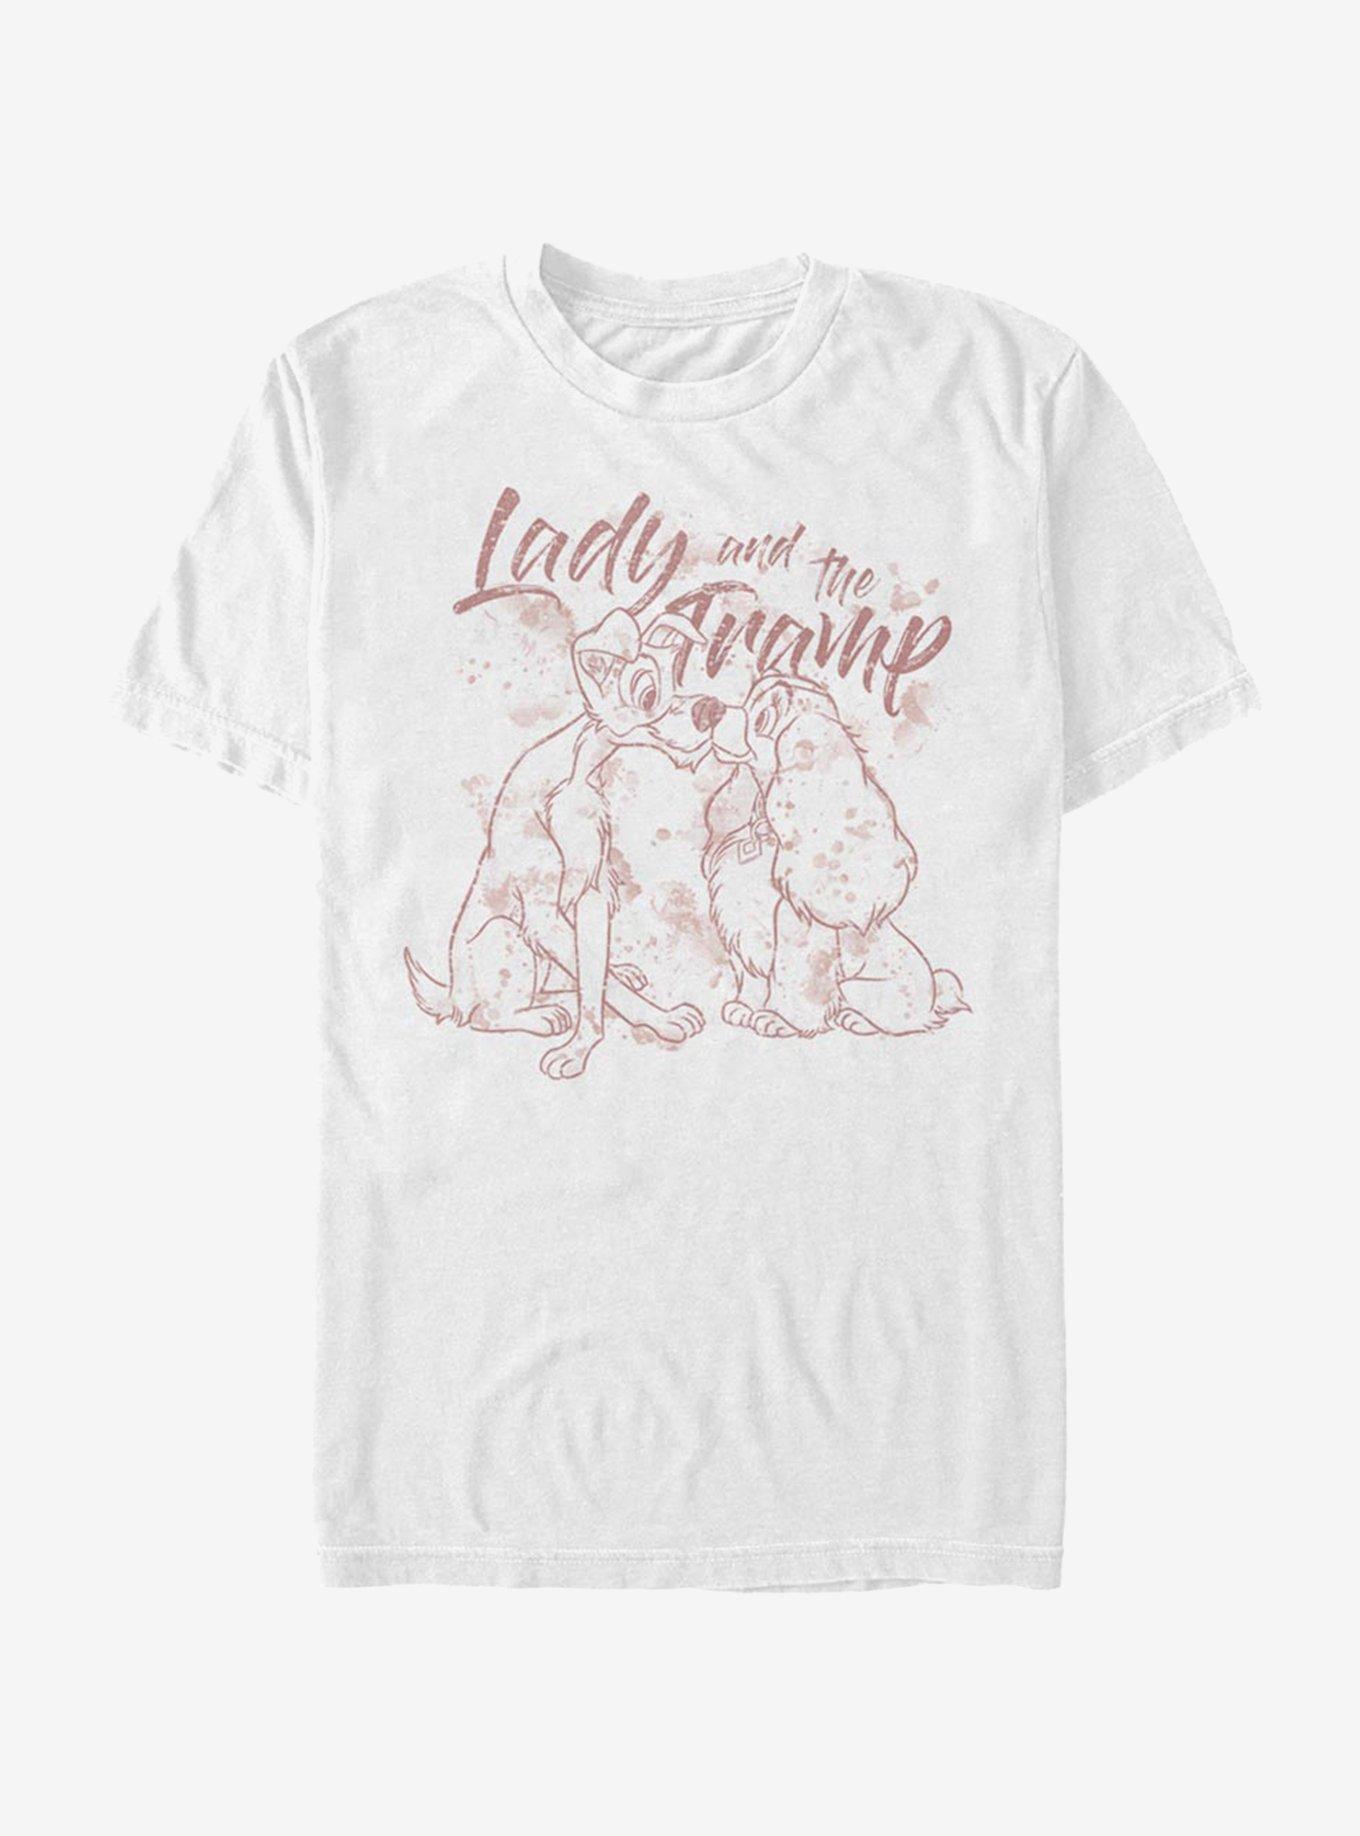 Disney Lady And The Tramp Classic Line Art T-Shirt, WHITE, hi-res